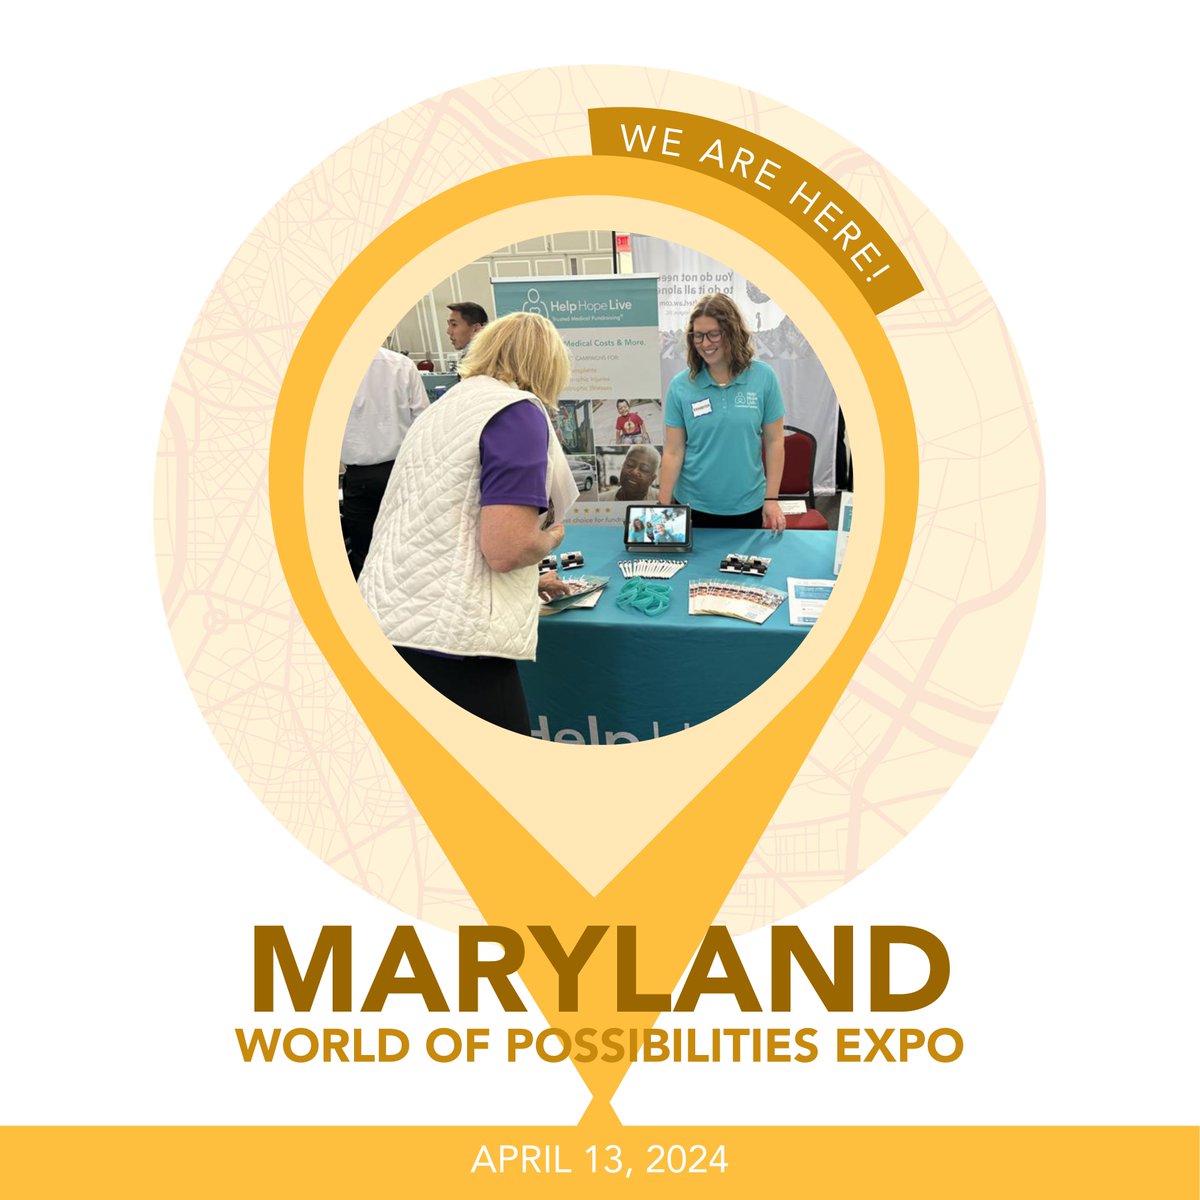 We are here in Maryland at the World of Possibilities Expo with Caring Communities! Today's event has one goal: bring people with disabilities, their families, caregivers, service providers and supporting agencies together in one venue. We are so happy to be here!